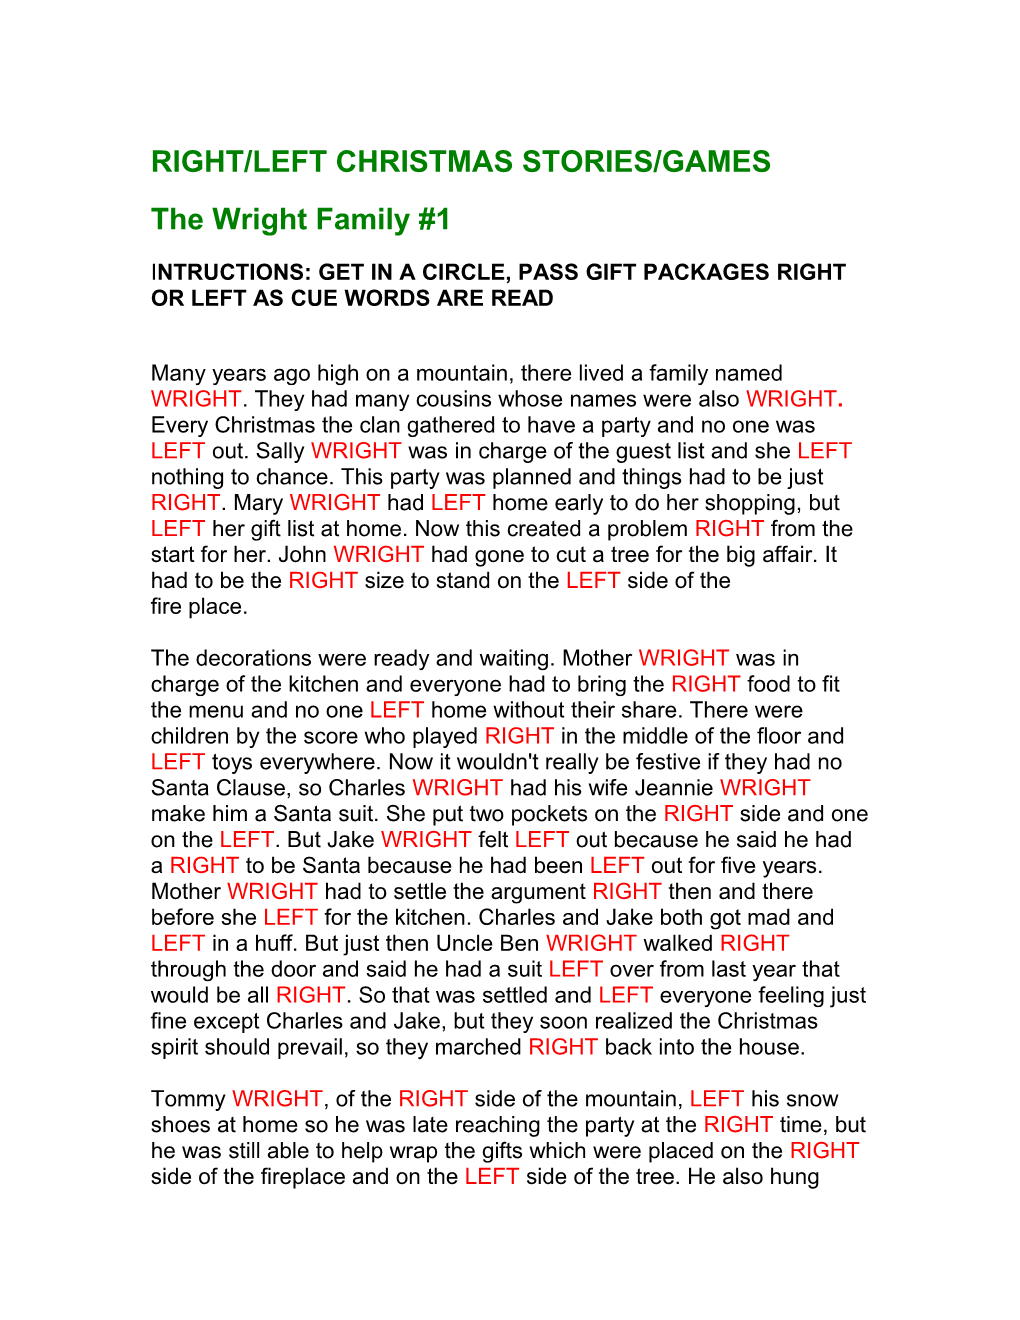 RIGHT/LEFT CHRISTMAS STORIES/GAMES the Wright Family #1